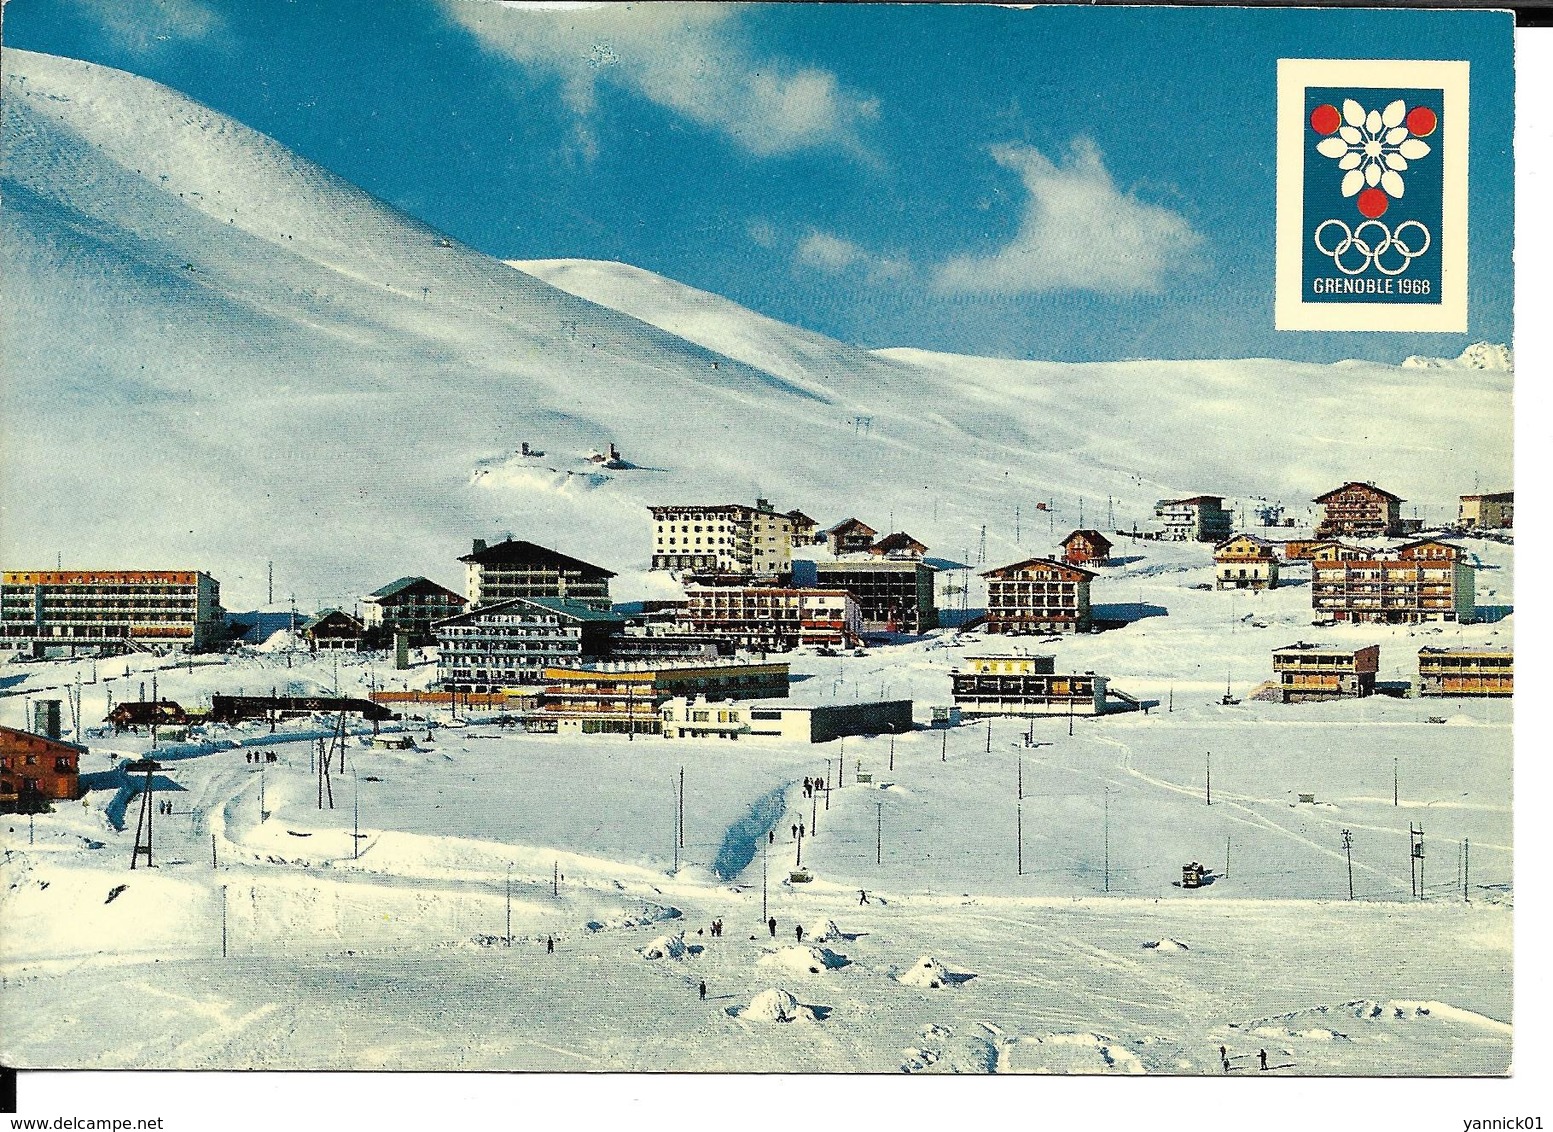 JEUX OLYMPIQUES HIVER GRENOBLE 1968 OLYMPICS WINTER GAMES - STATION ALPE HUEZ - Olympische Spelen